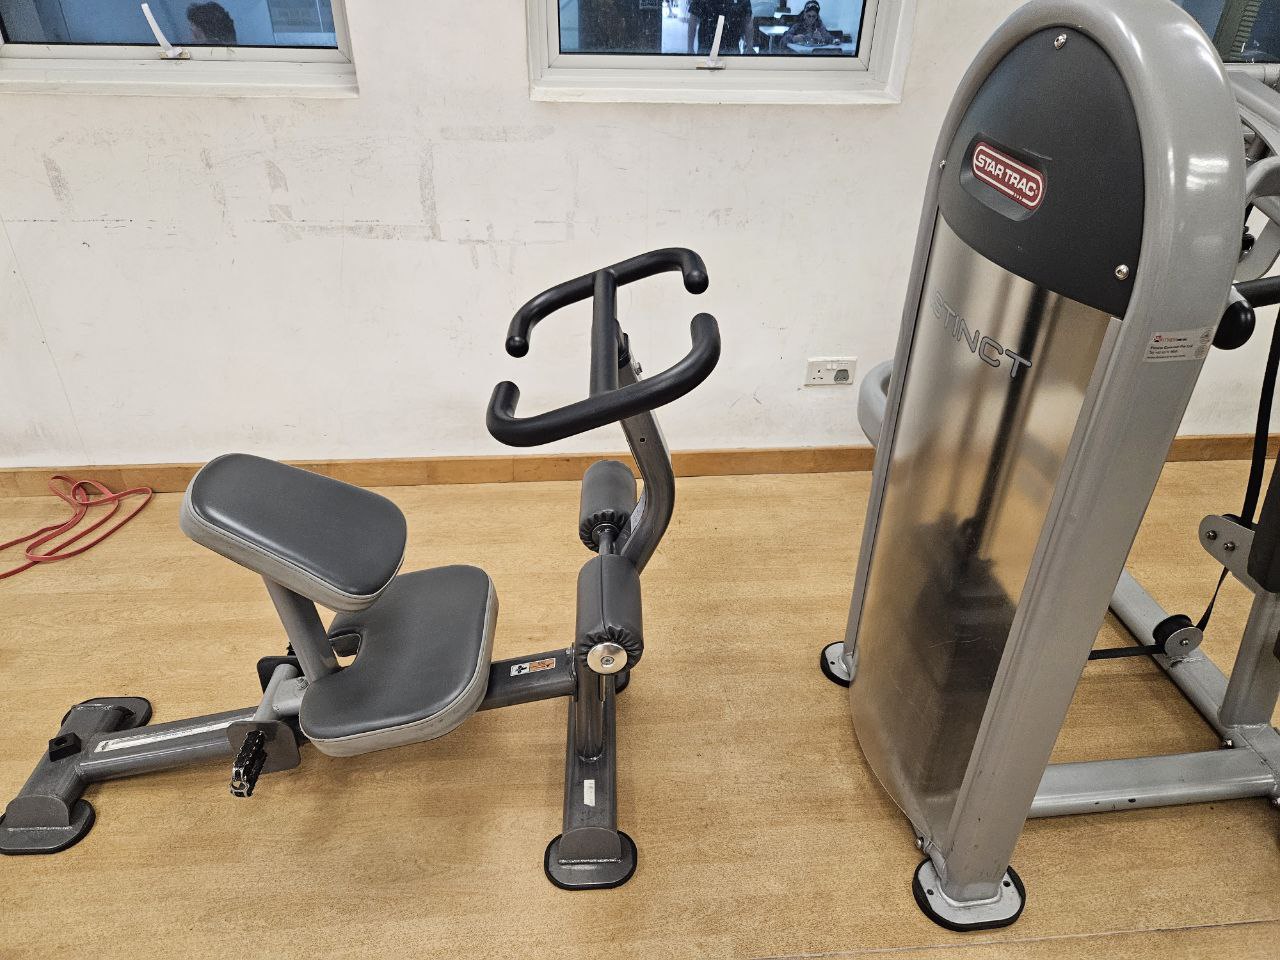 "This Machine Doesn't Seem to Work Either", Or: A Tour of the BTC Gym